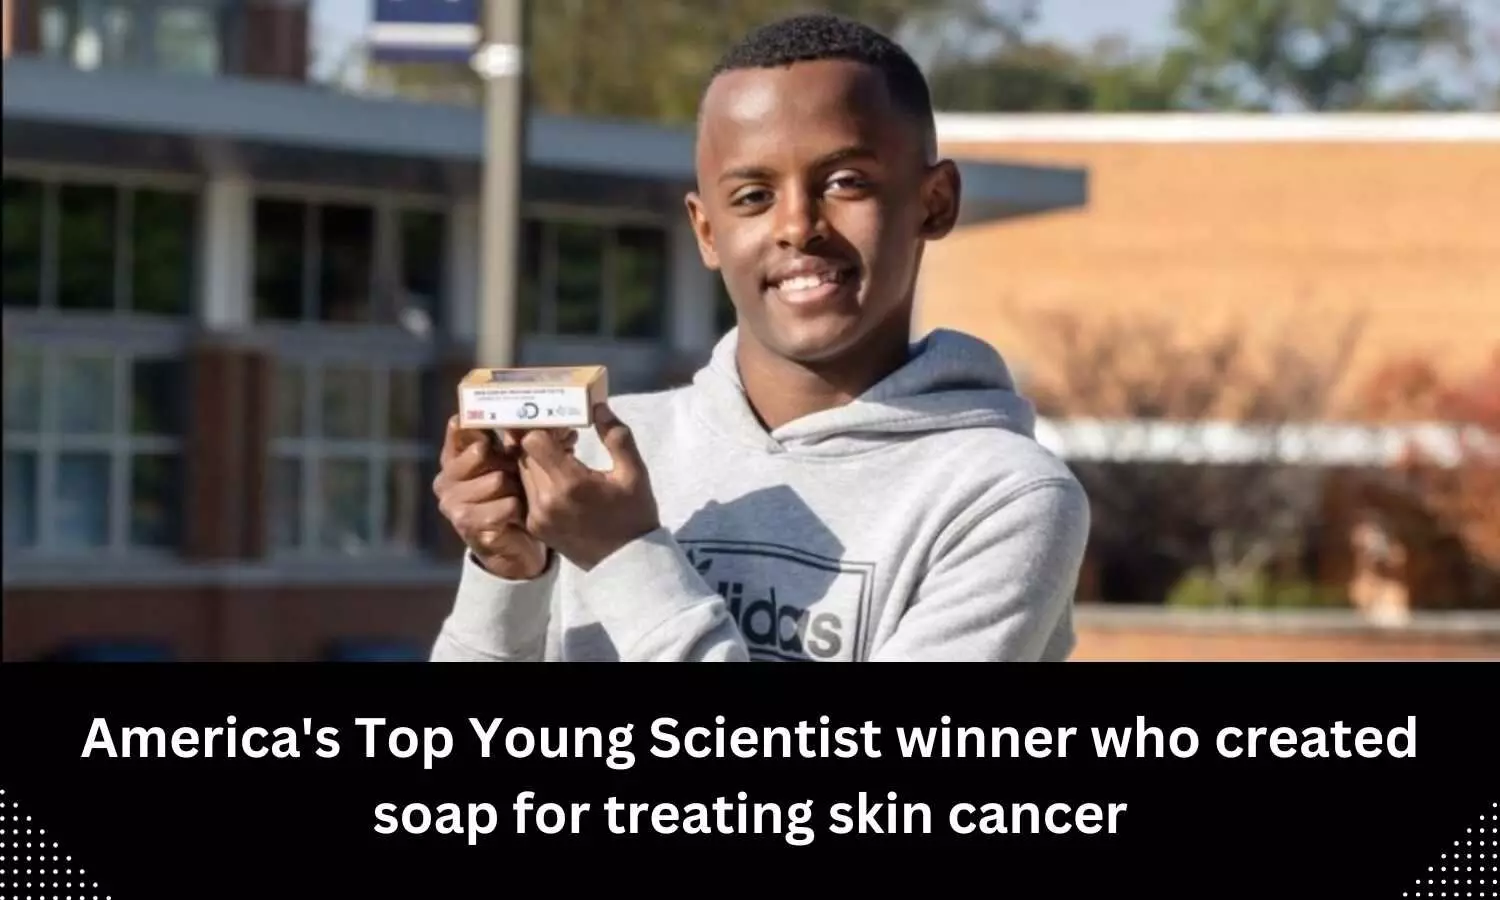 Heman Bekele who created soap for skin cancer wins Americas Top Young Scientist award